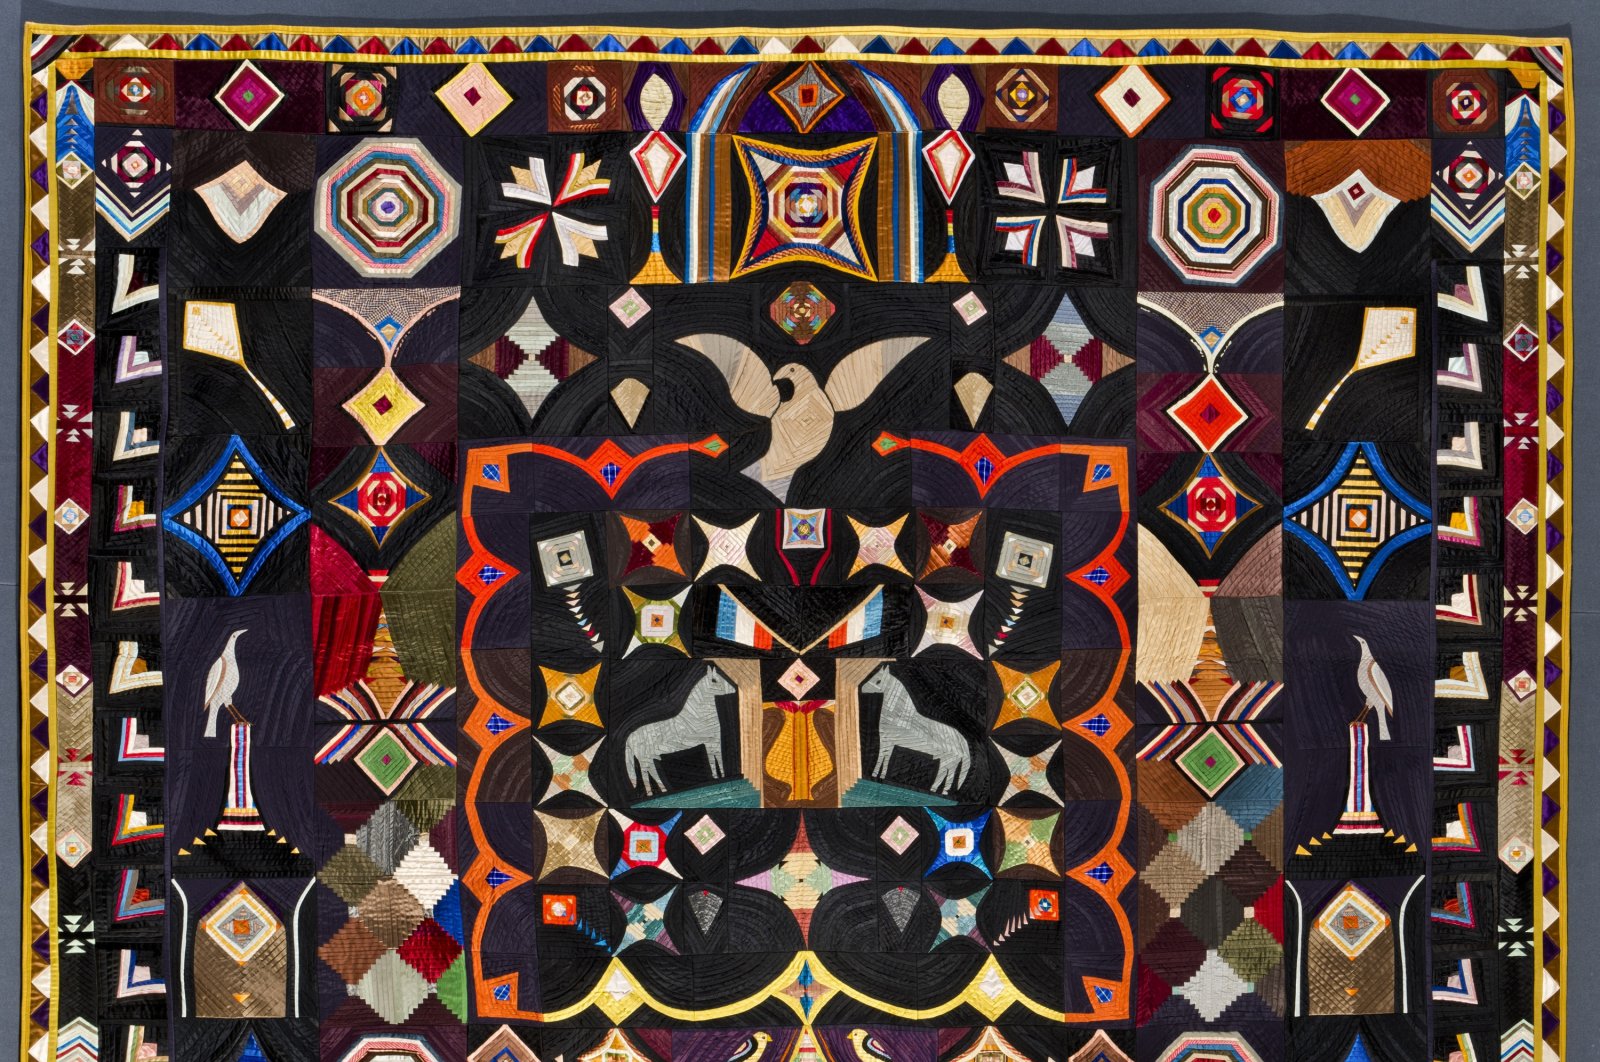 The photo shows the Original Design Quilt made by Corning, New York tailor Carl Klewicke around 1907. The piece is made of vivid bits of silk, faille, taffeta and satin depicting stars, kites and doves. (AP Photo)